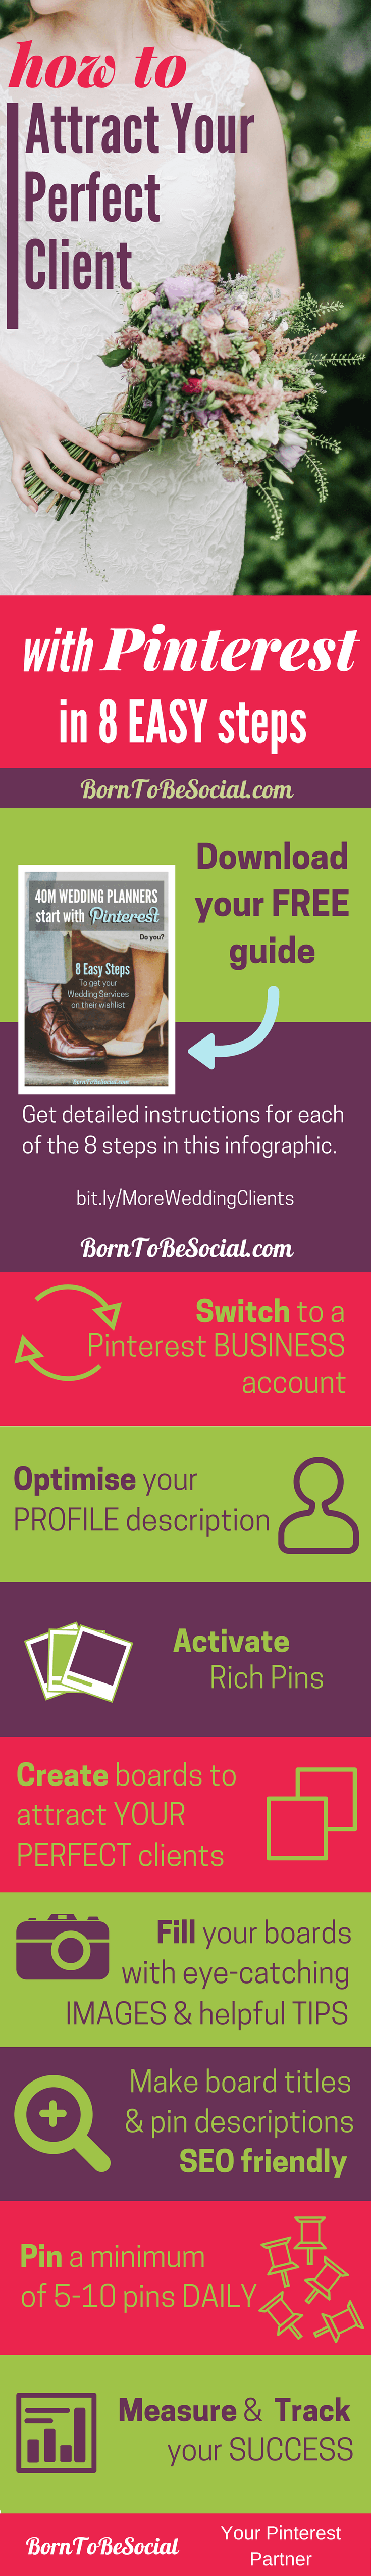 INFOGRAPHIC - HOW TO FIND WEDDING CLIENTS WITH PINTEREST for Hotel Wedding Venues, Wedding Planners & Photographers - 8-Step Checklist & Action Plan. Your perfect clients spend a LOT of time on Pinterest planning their perfect wedding and wedding reception, but are they finding their way to the wedding services on your website? |via @BornToBeSocial, Pinterest Marketing & Consulting